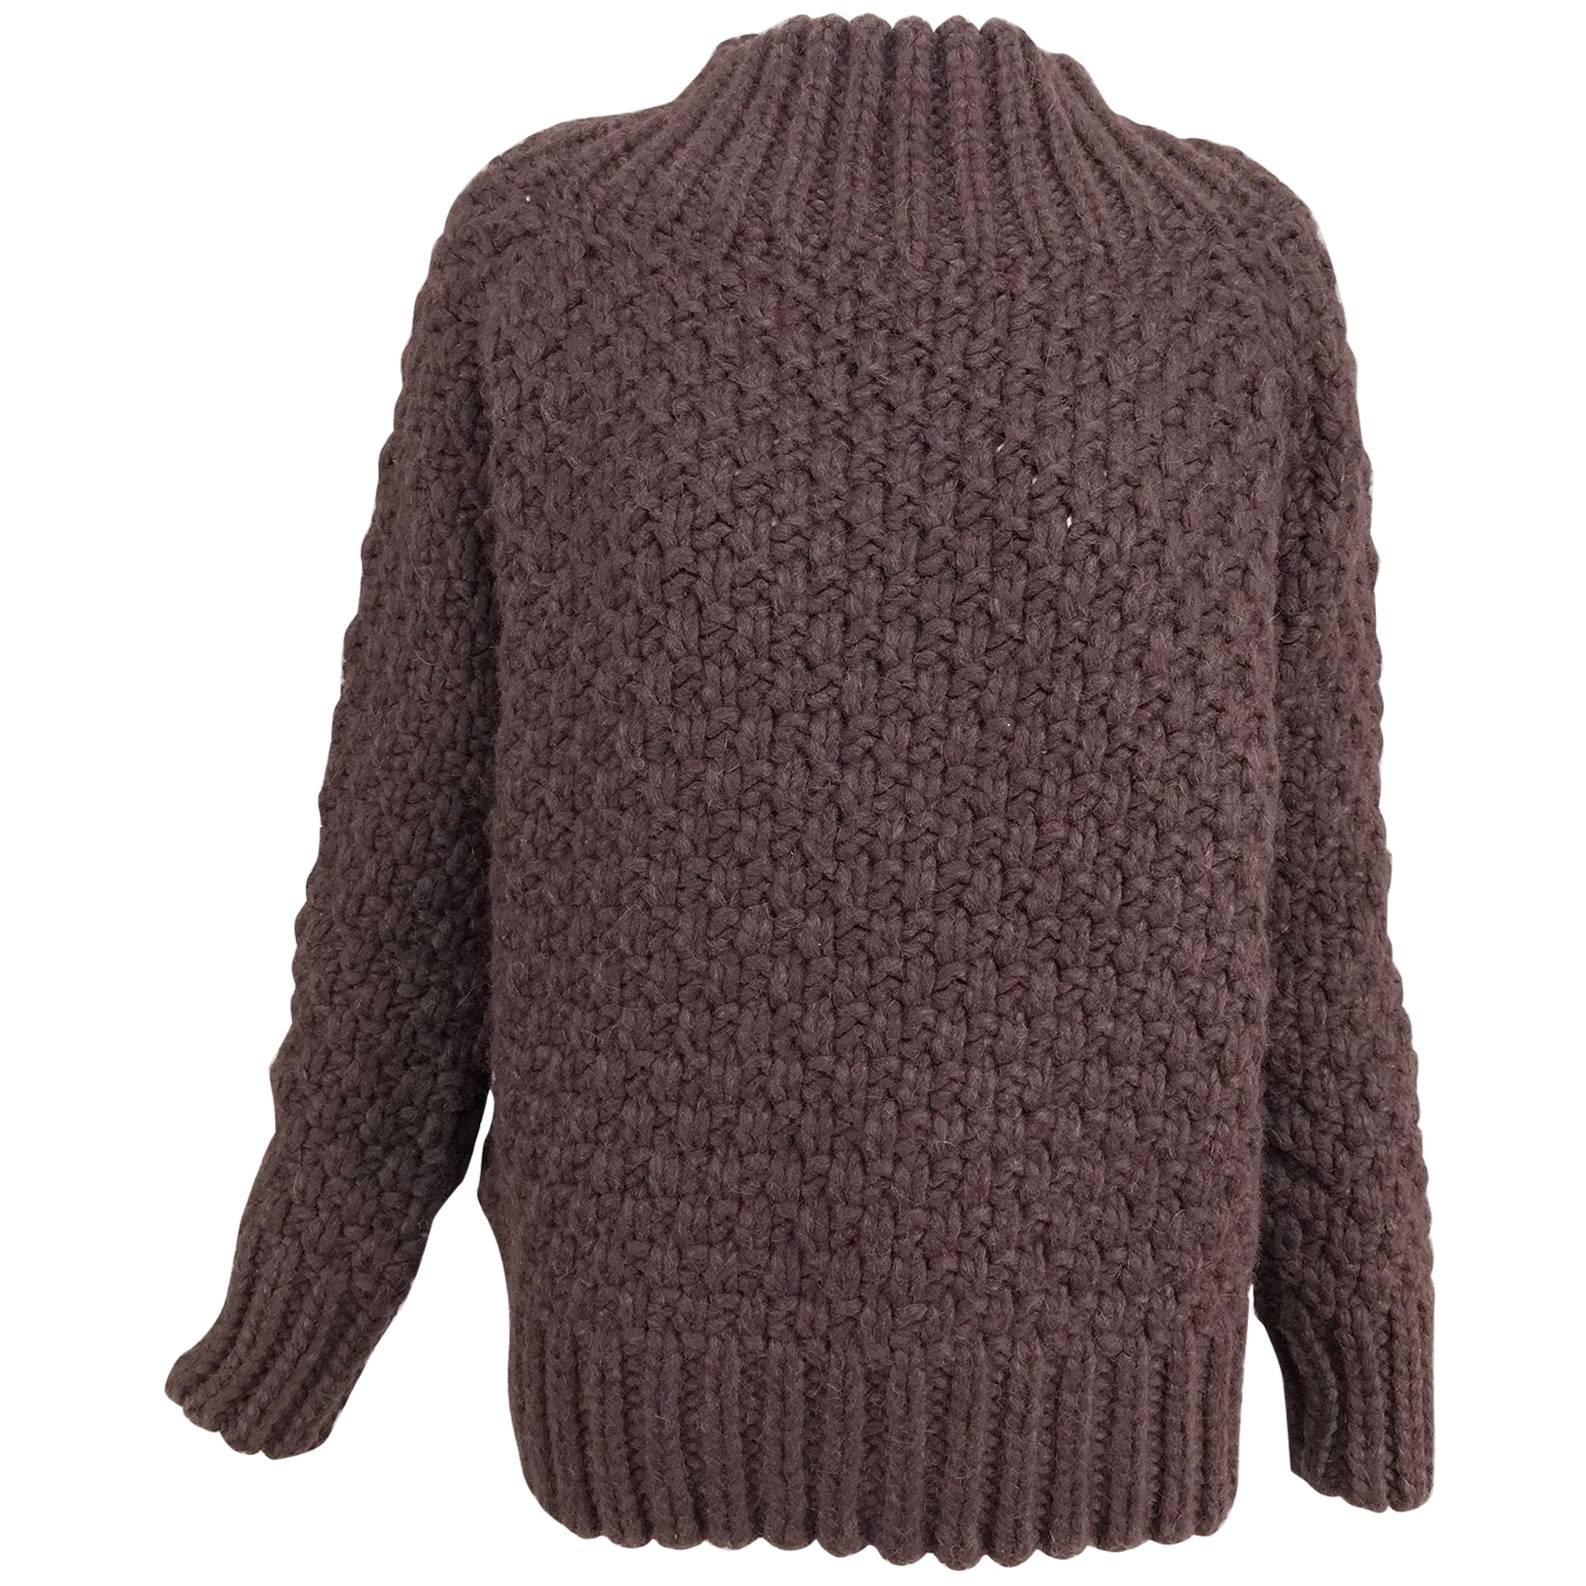 The Row chunky knit cashmere basket weave sweater